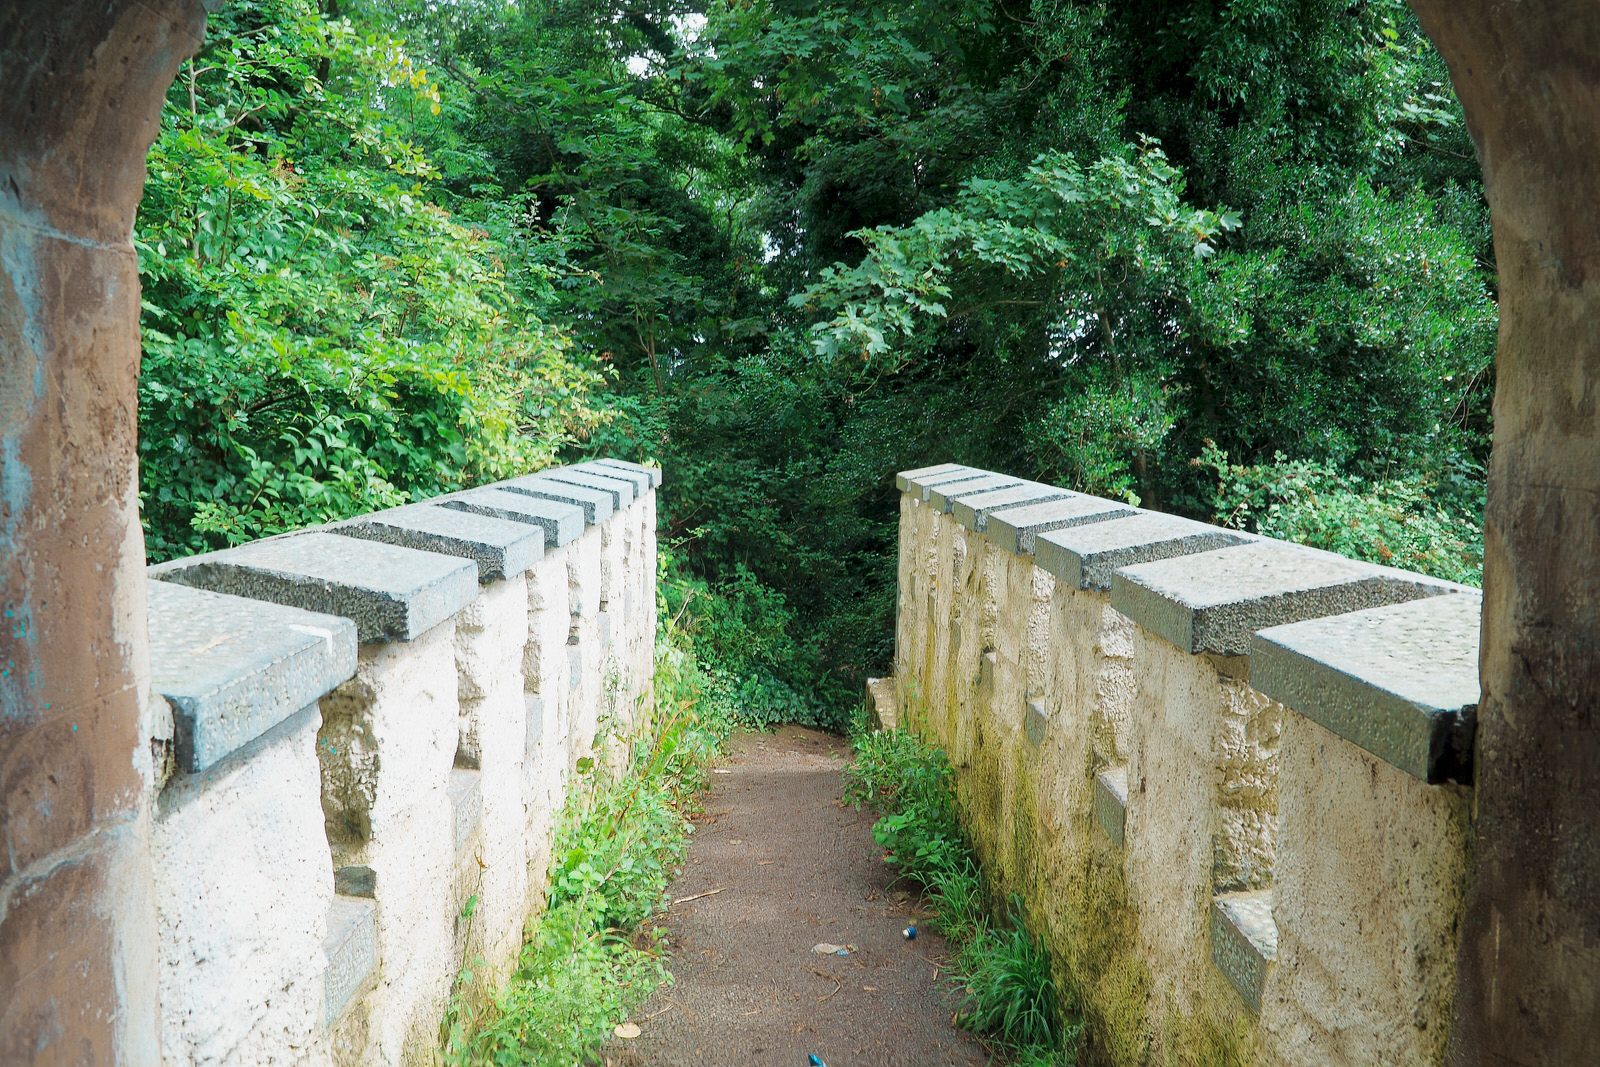 THE ANNIE LEE BRIDGE HAS BEEN RESTORED [THE OLDEST FOLLY IN ST ANNE'S PARK] 009